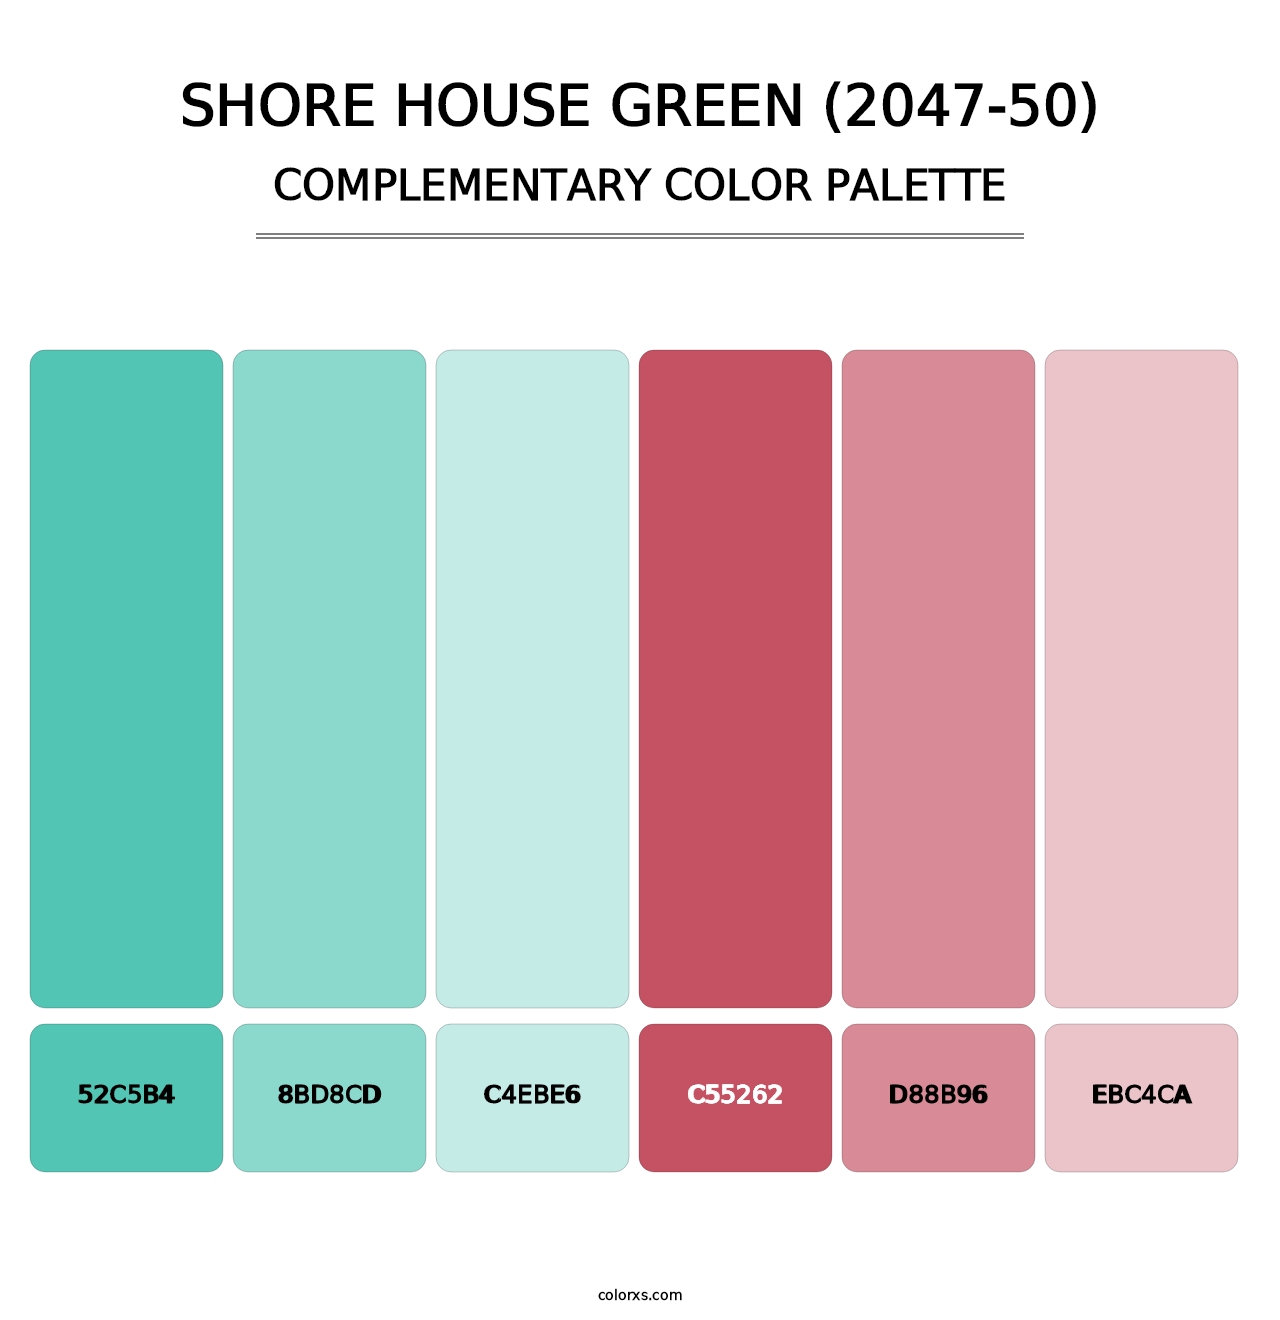 Shore House Green (2047-50) - Complementary Color Palette